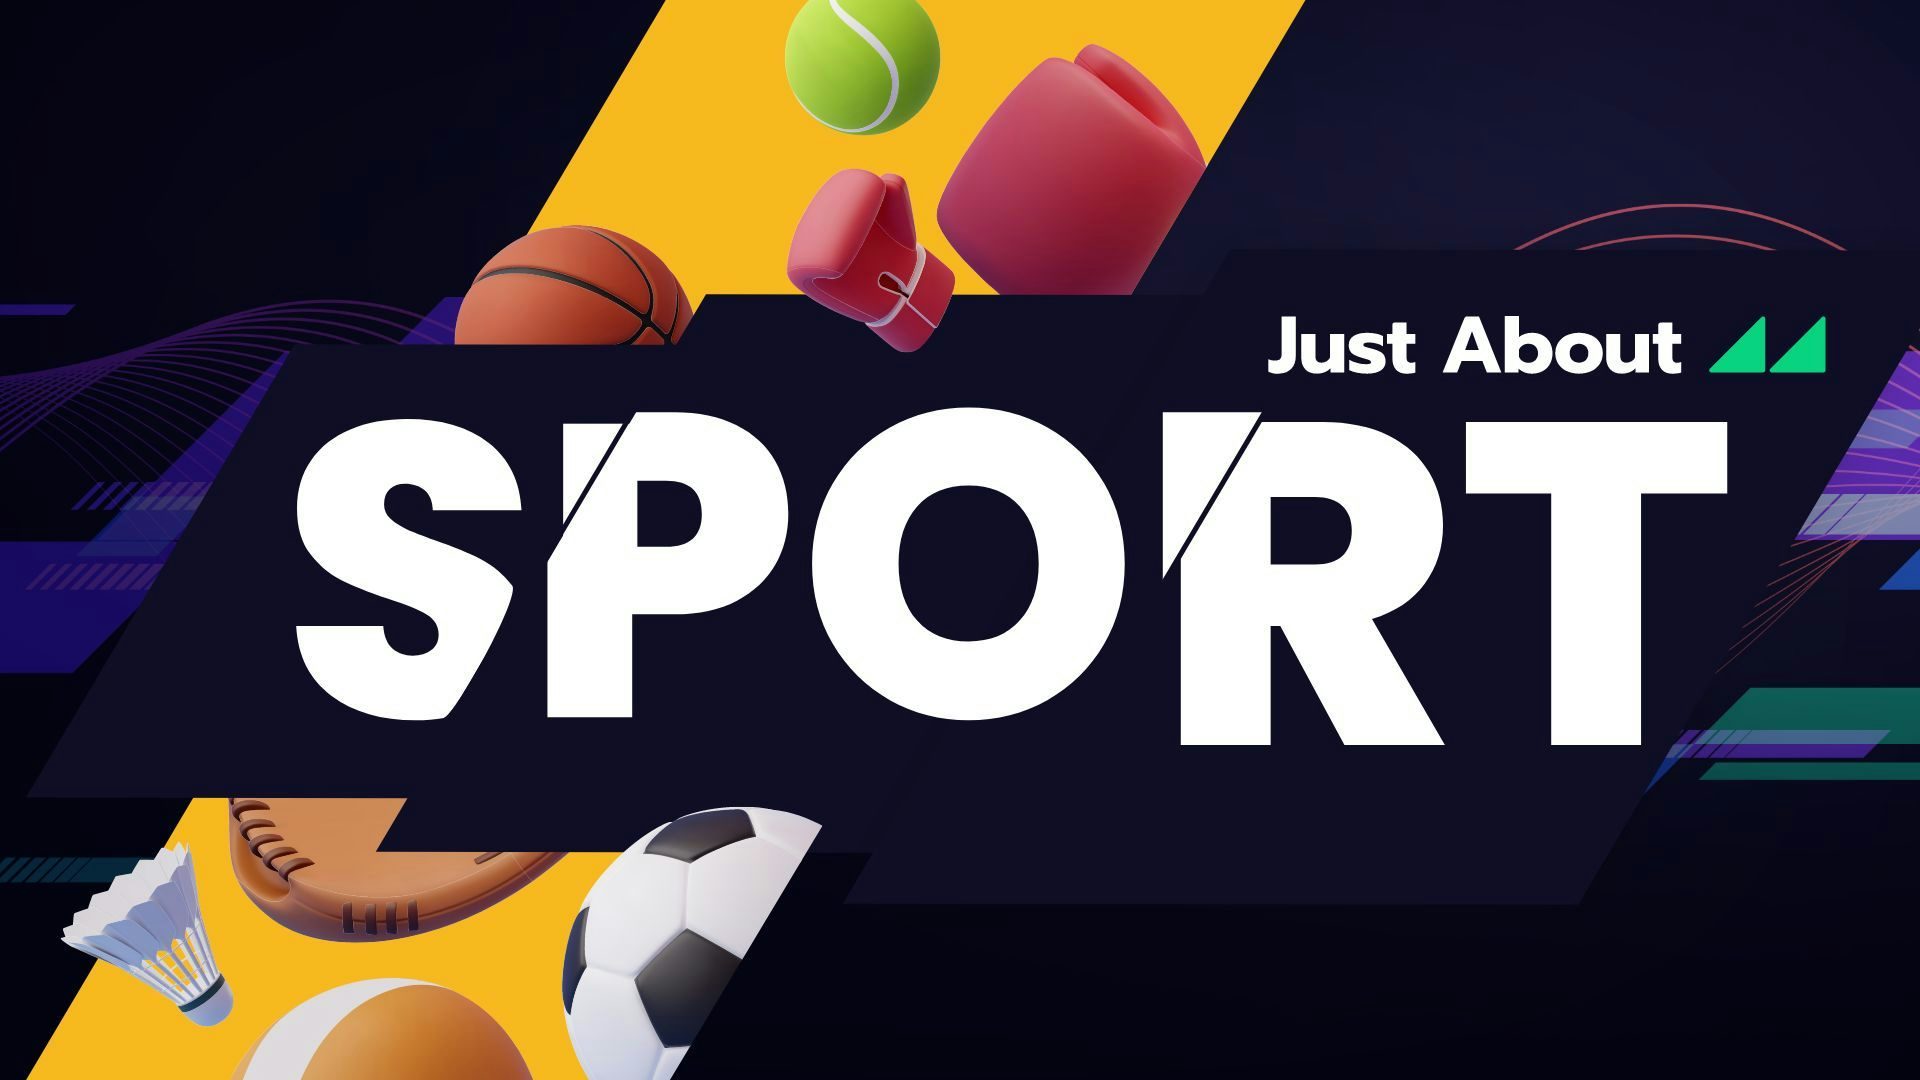 Welcome to Just About Sport